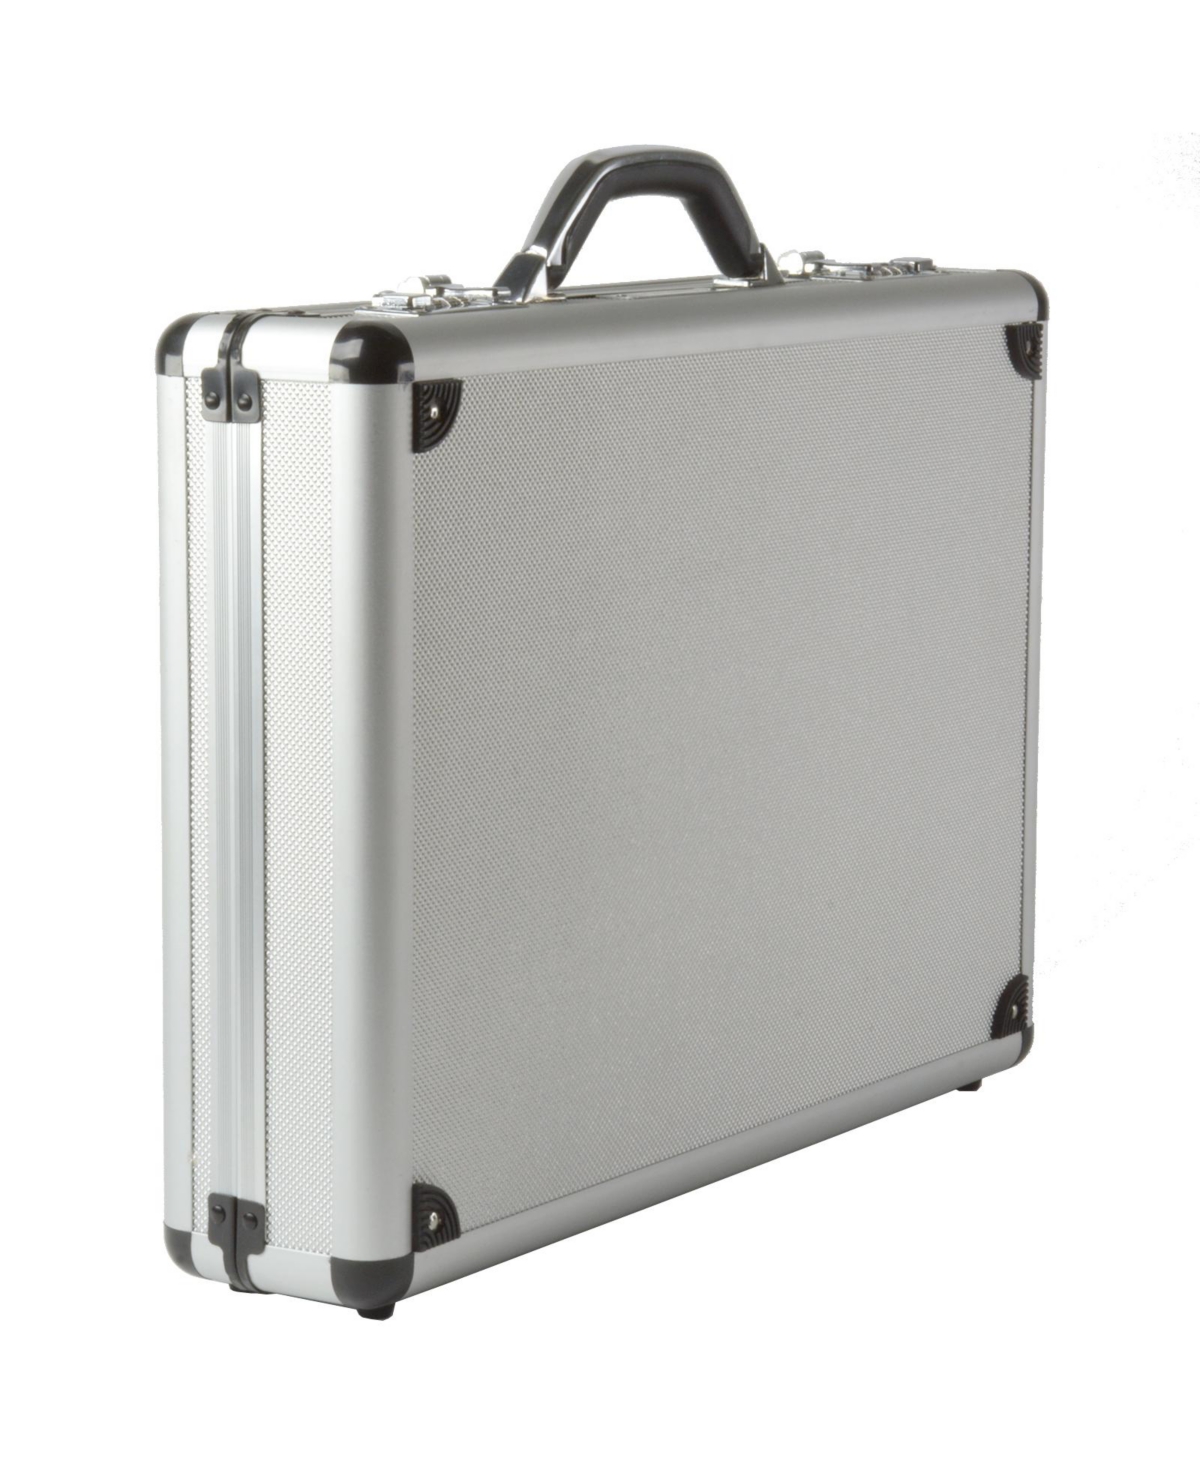 Aluminum Attache Case Padded Laptop Briefcase Combo Lock Hard Sided - Silver